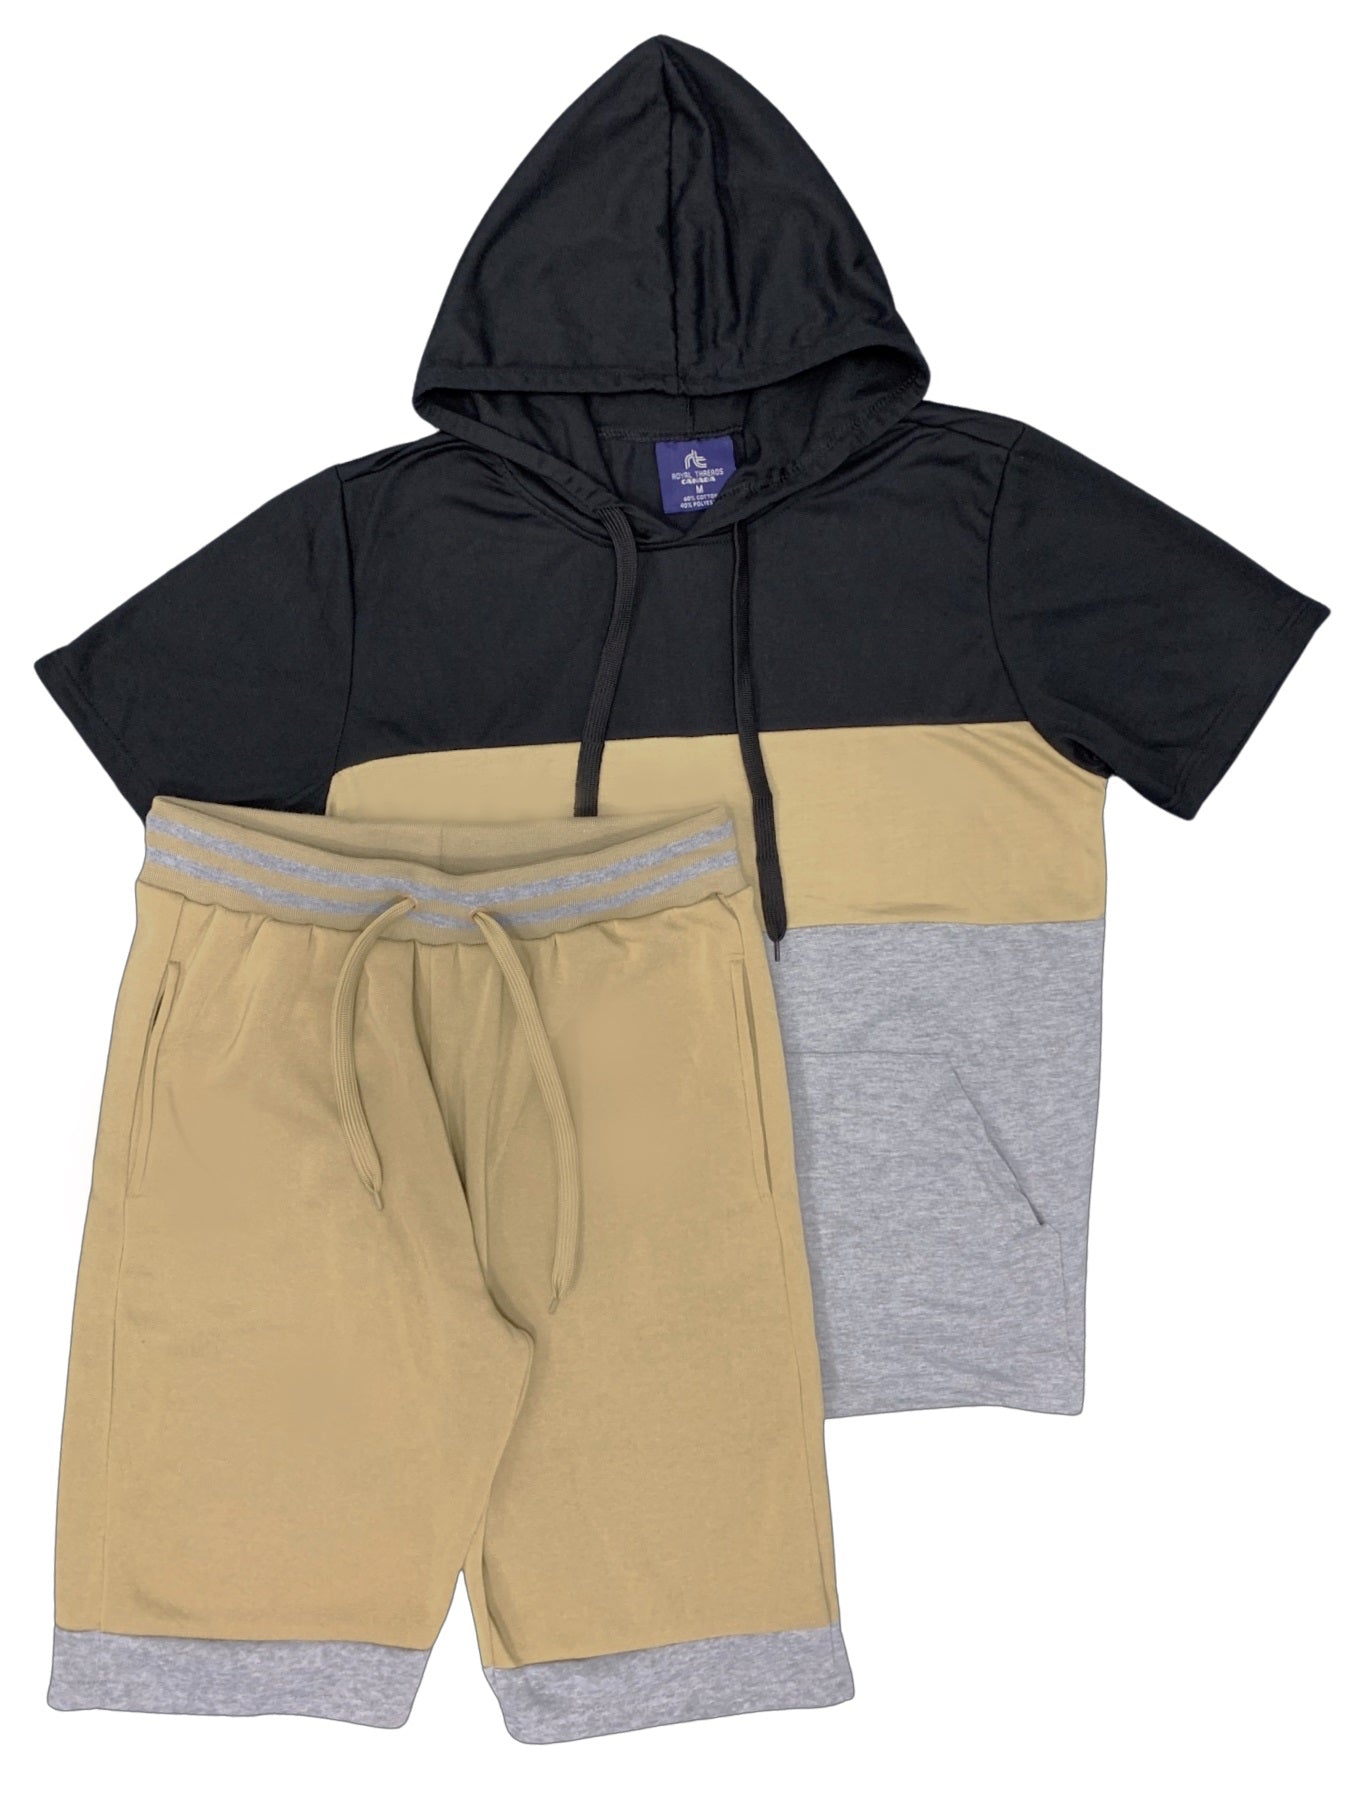 Royal Threads Canada Men’s 2-piece Color block Short Set pullover Hoodie with matching shorts